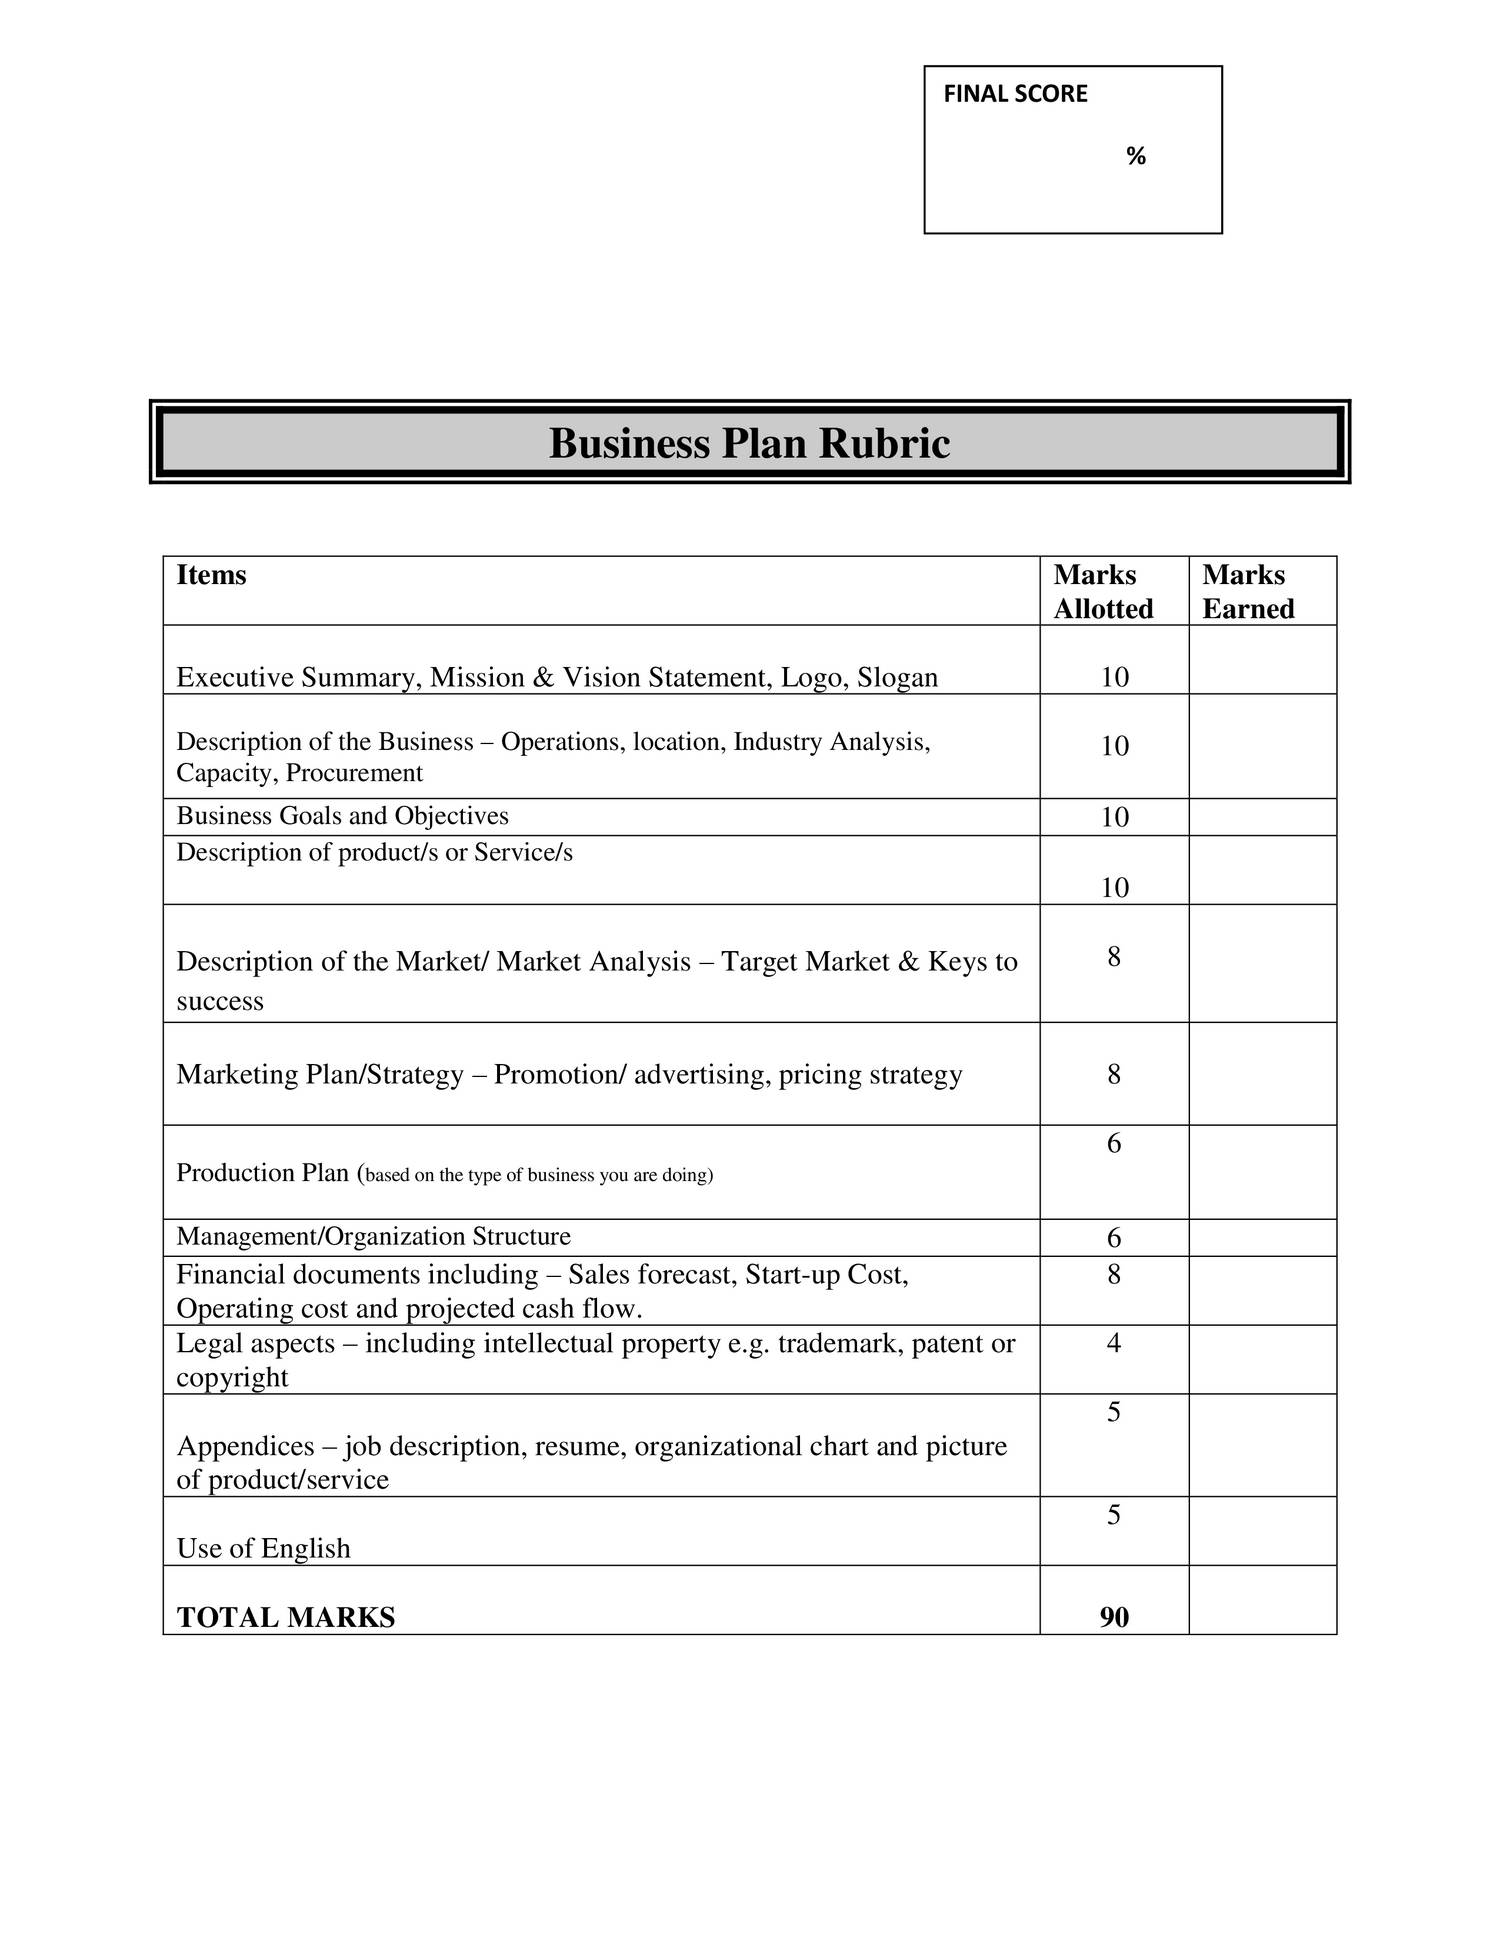 business plan competition rubric